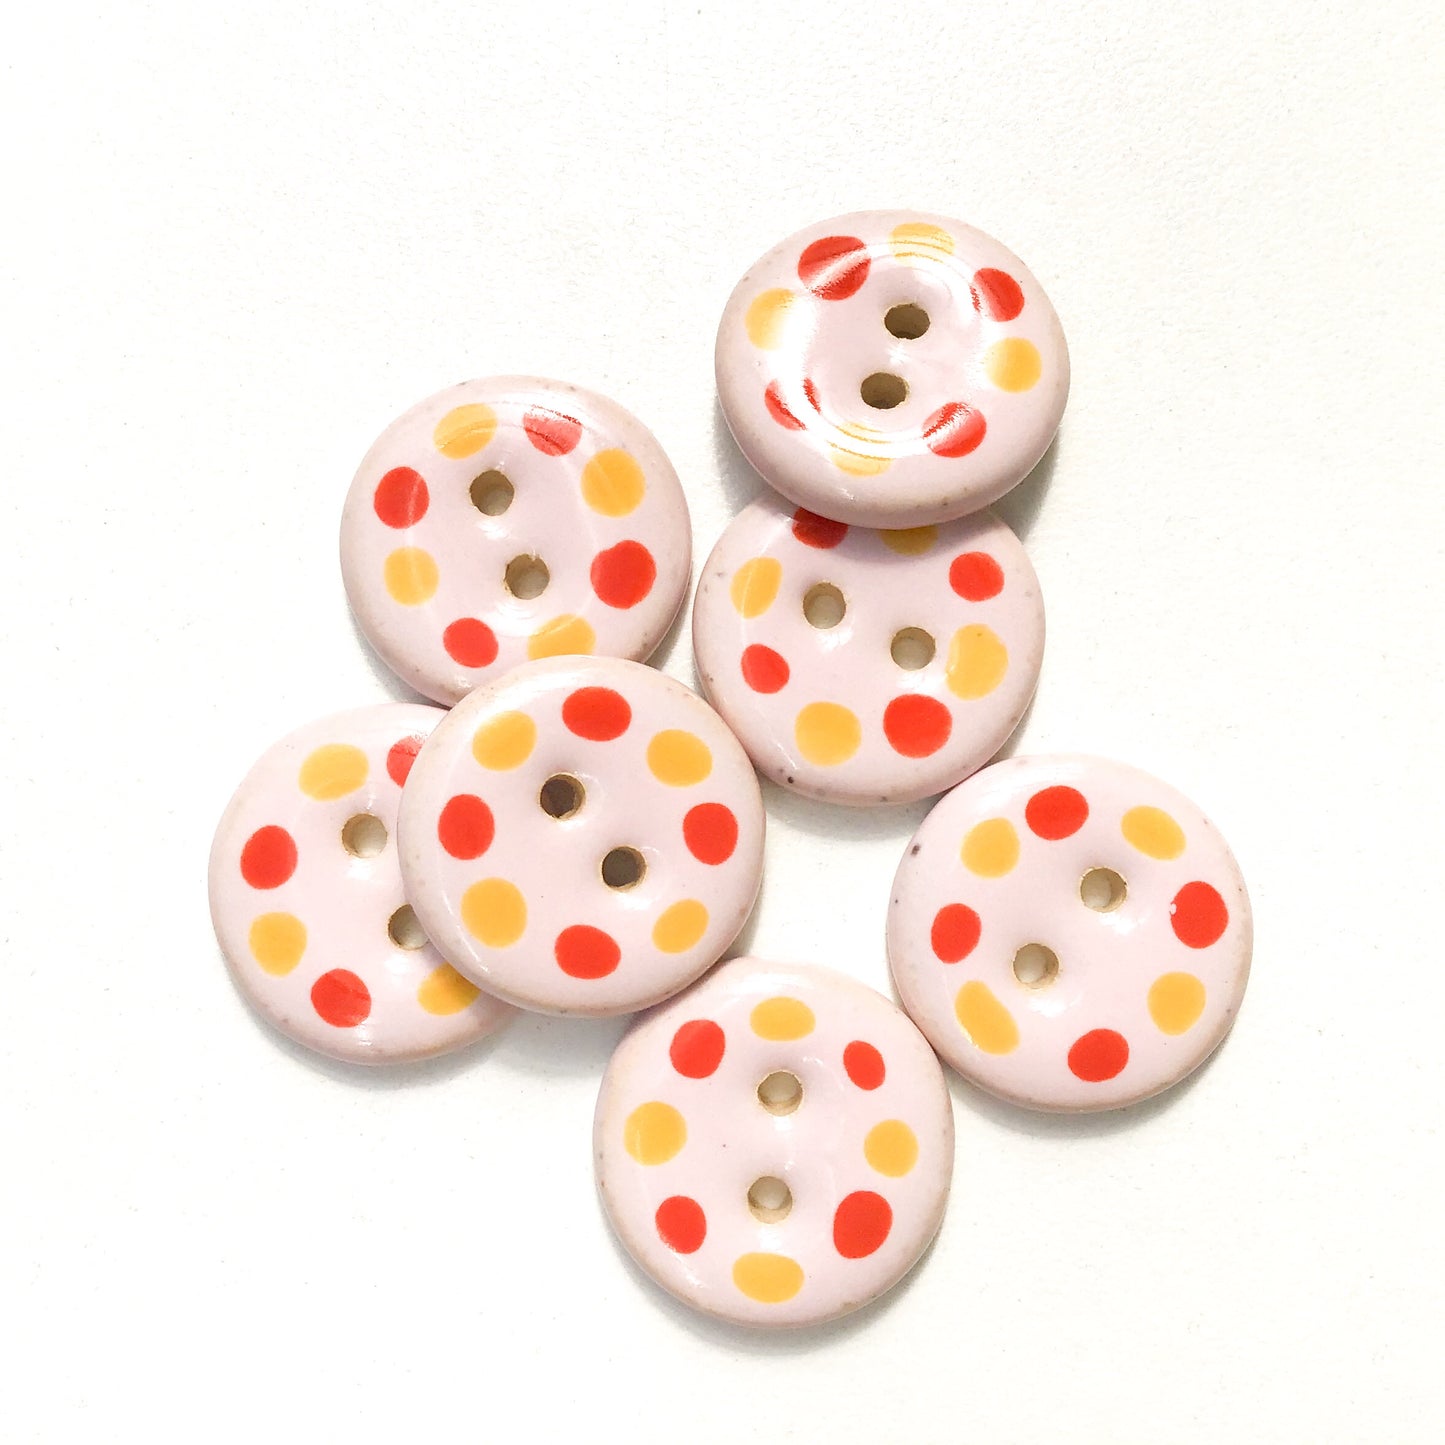 Pink Cobblestone Ceramic Buttons with Deep Orange & Yellow Dots - Pink Clay Buttons - 3/4" - 7 Pack